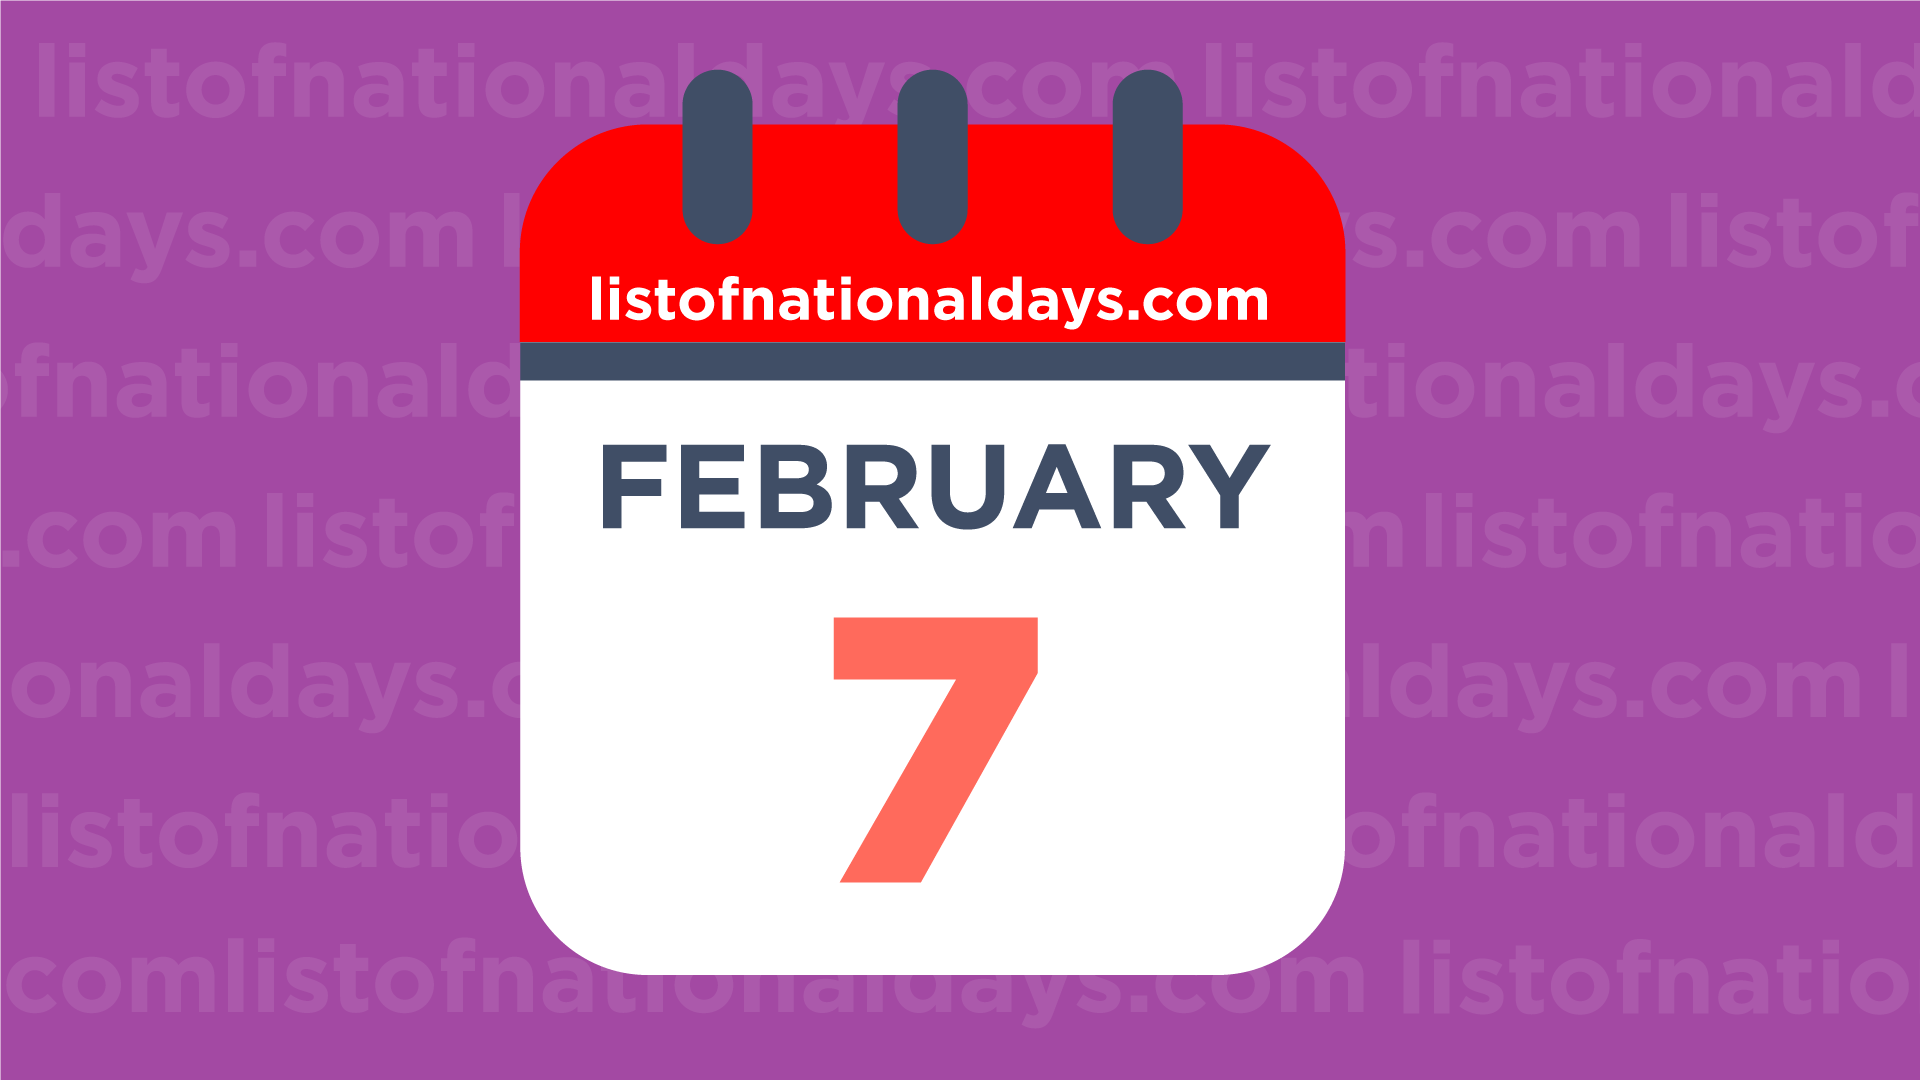 What National day is February 7?